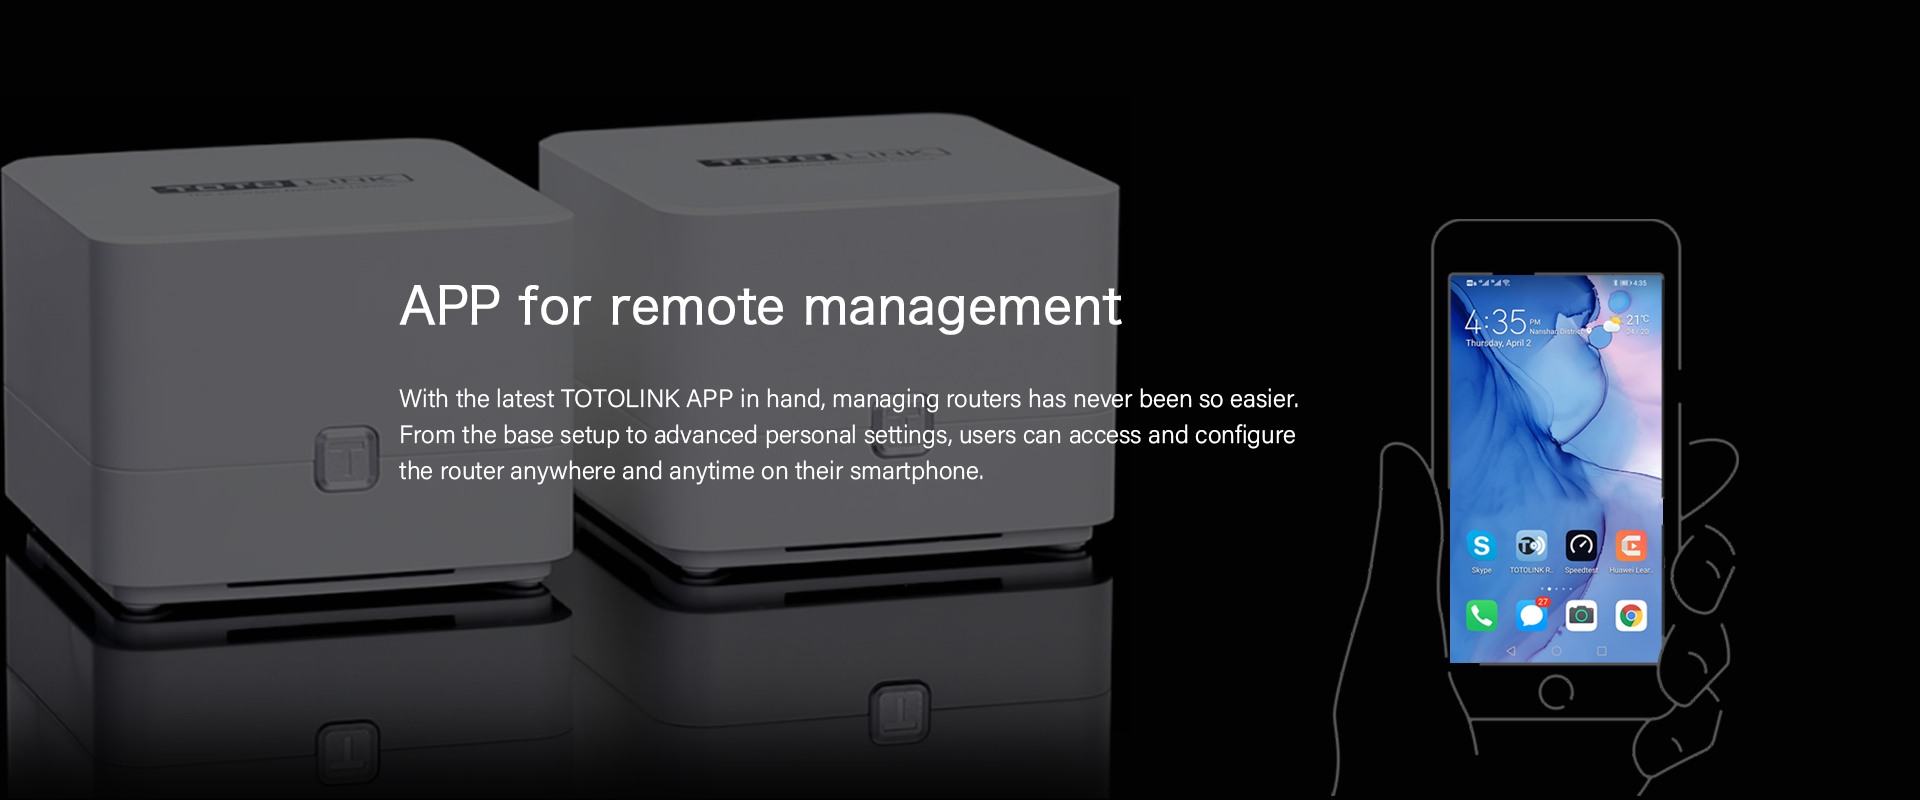 App for remote management Support Router 